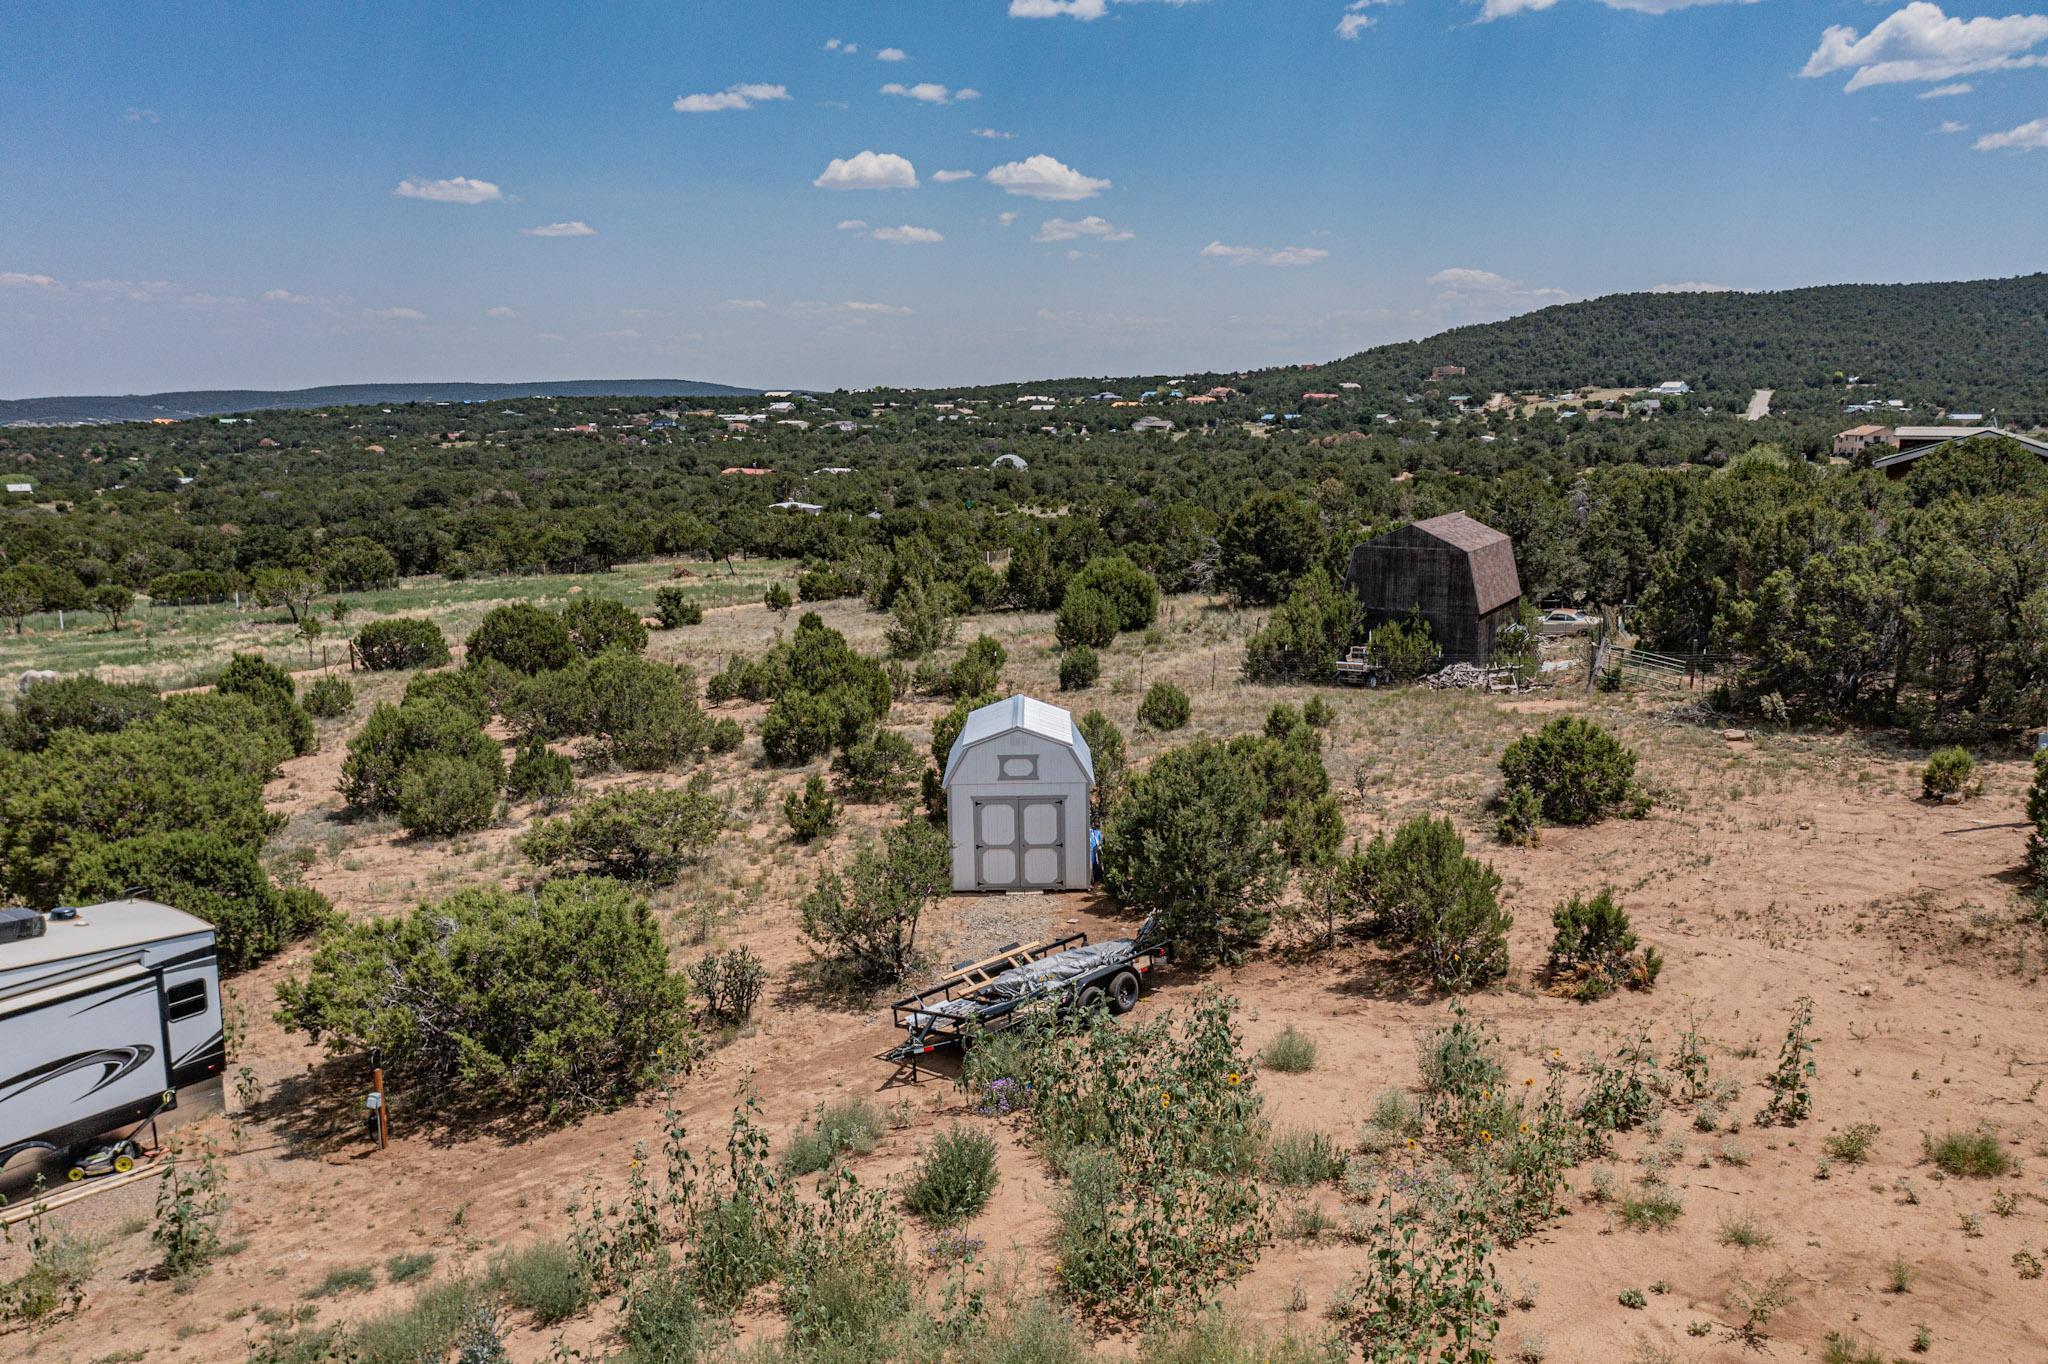 19 Edge Of Wood Rd Road, Tijeras, New Mexico 87059, ,Land,For Sale,19 Edge Of Wood Rd Road,1059556